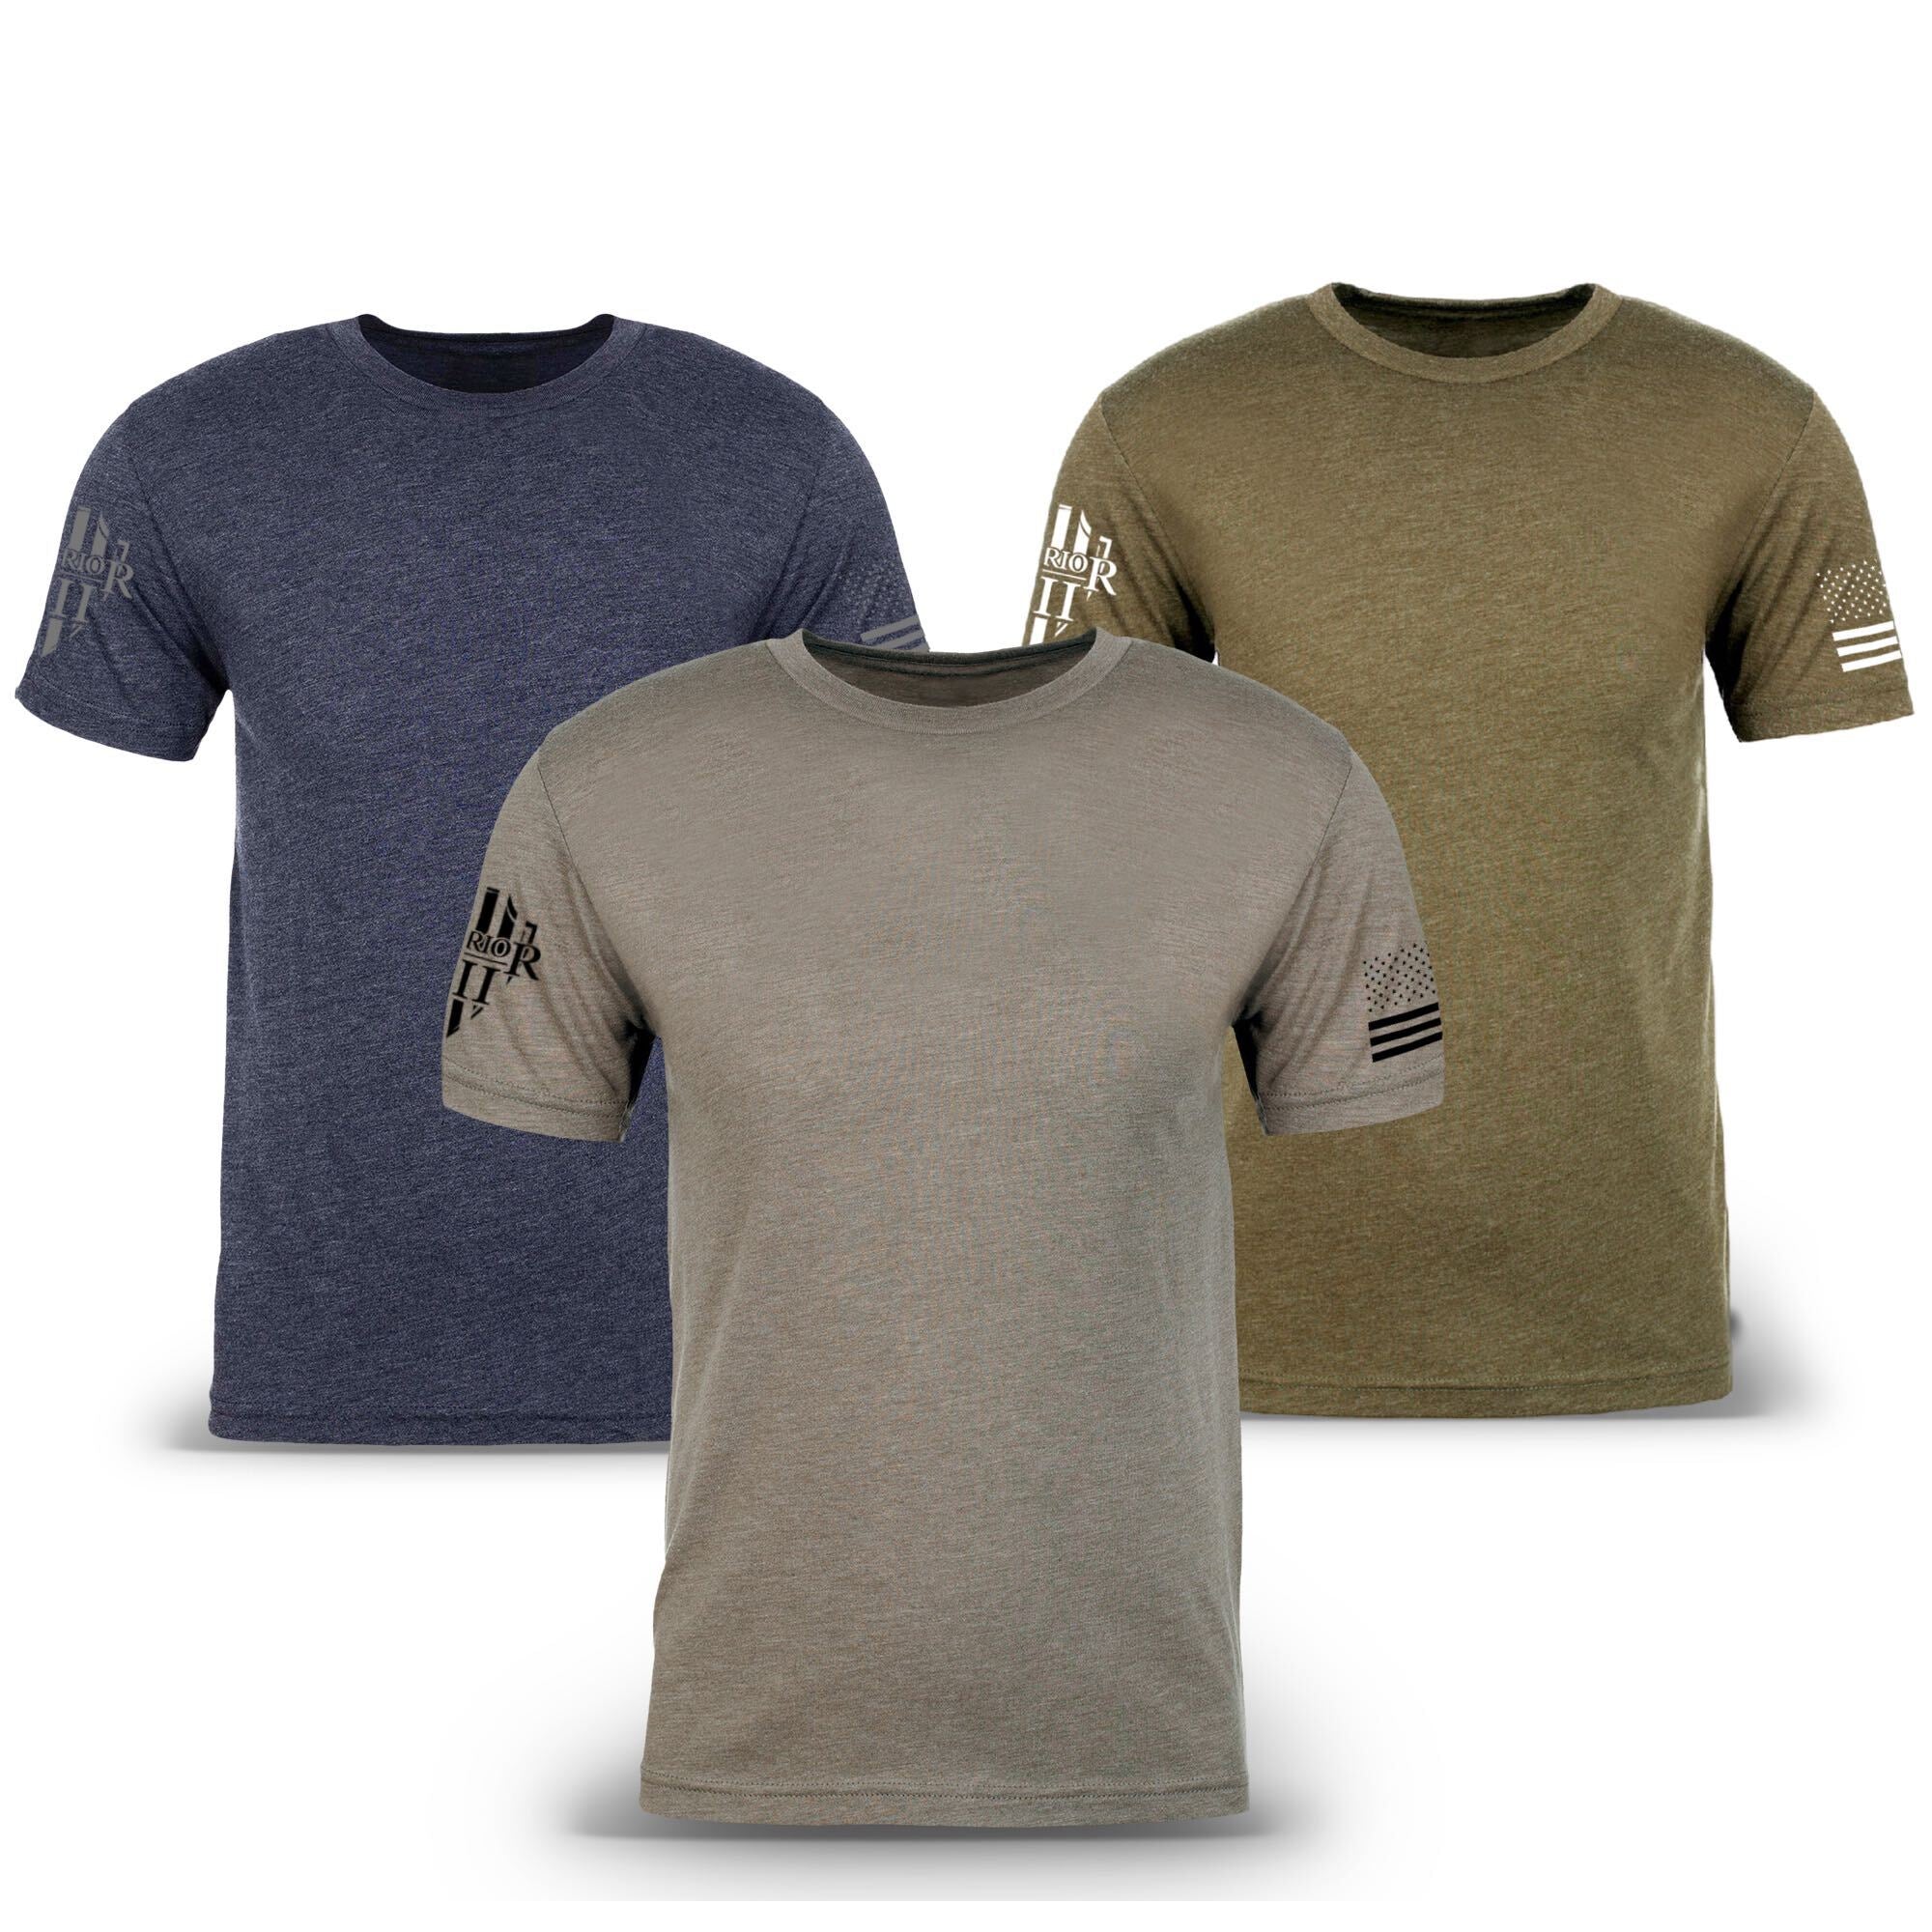 Vintage Navy, Military Green, and Vintage Grey triblend t-shirts with the Warrior 12 logo and American Flag on the sleeves.